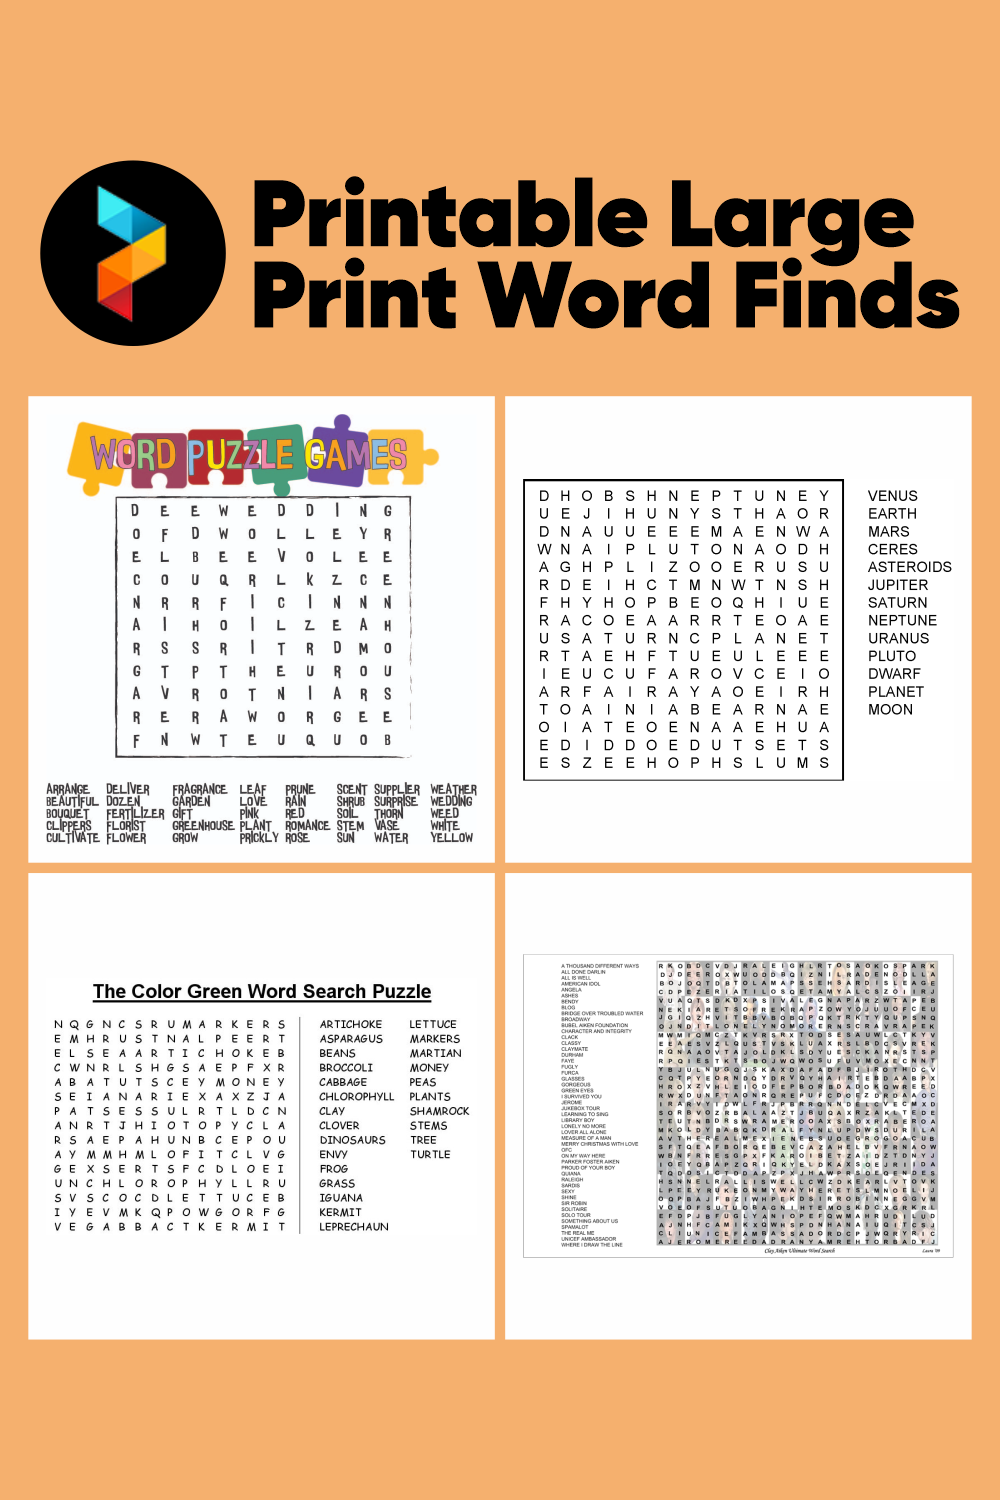 Printable Large Print Word Finds